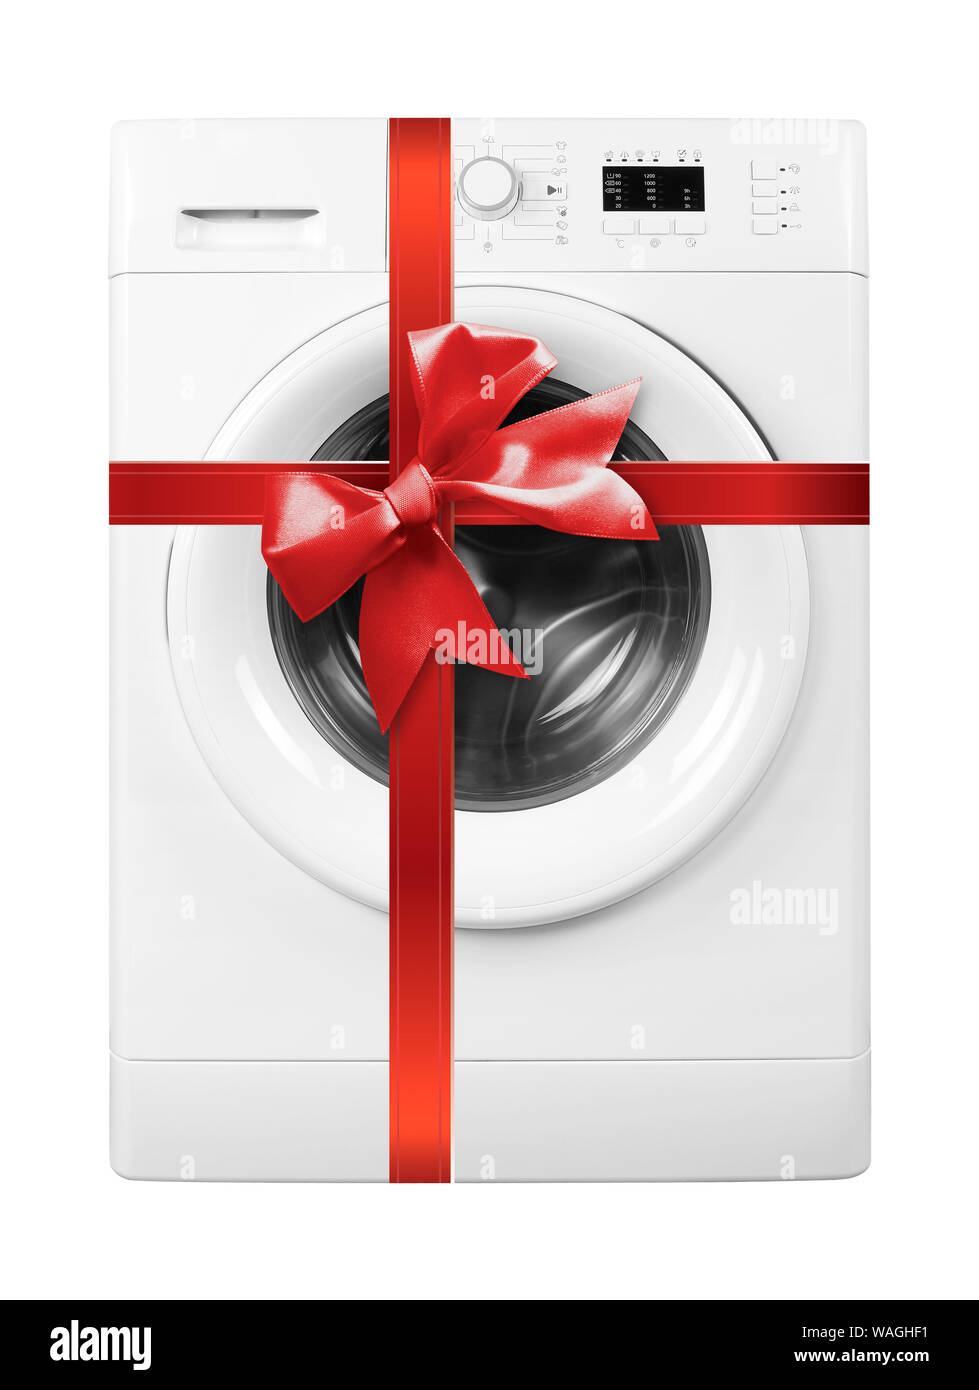 Major appliance - Front view washing machine gift tied red bow isolated on a white background Stock Photo